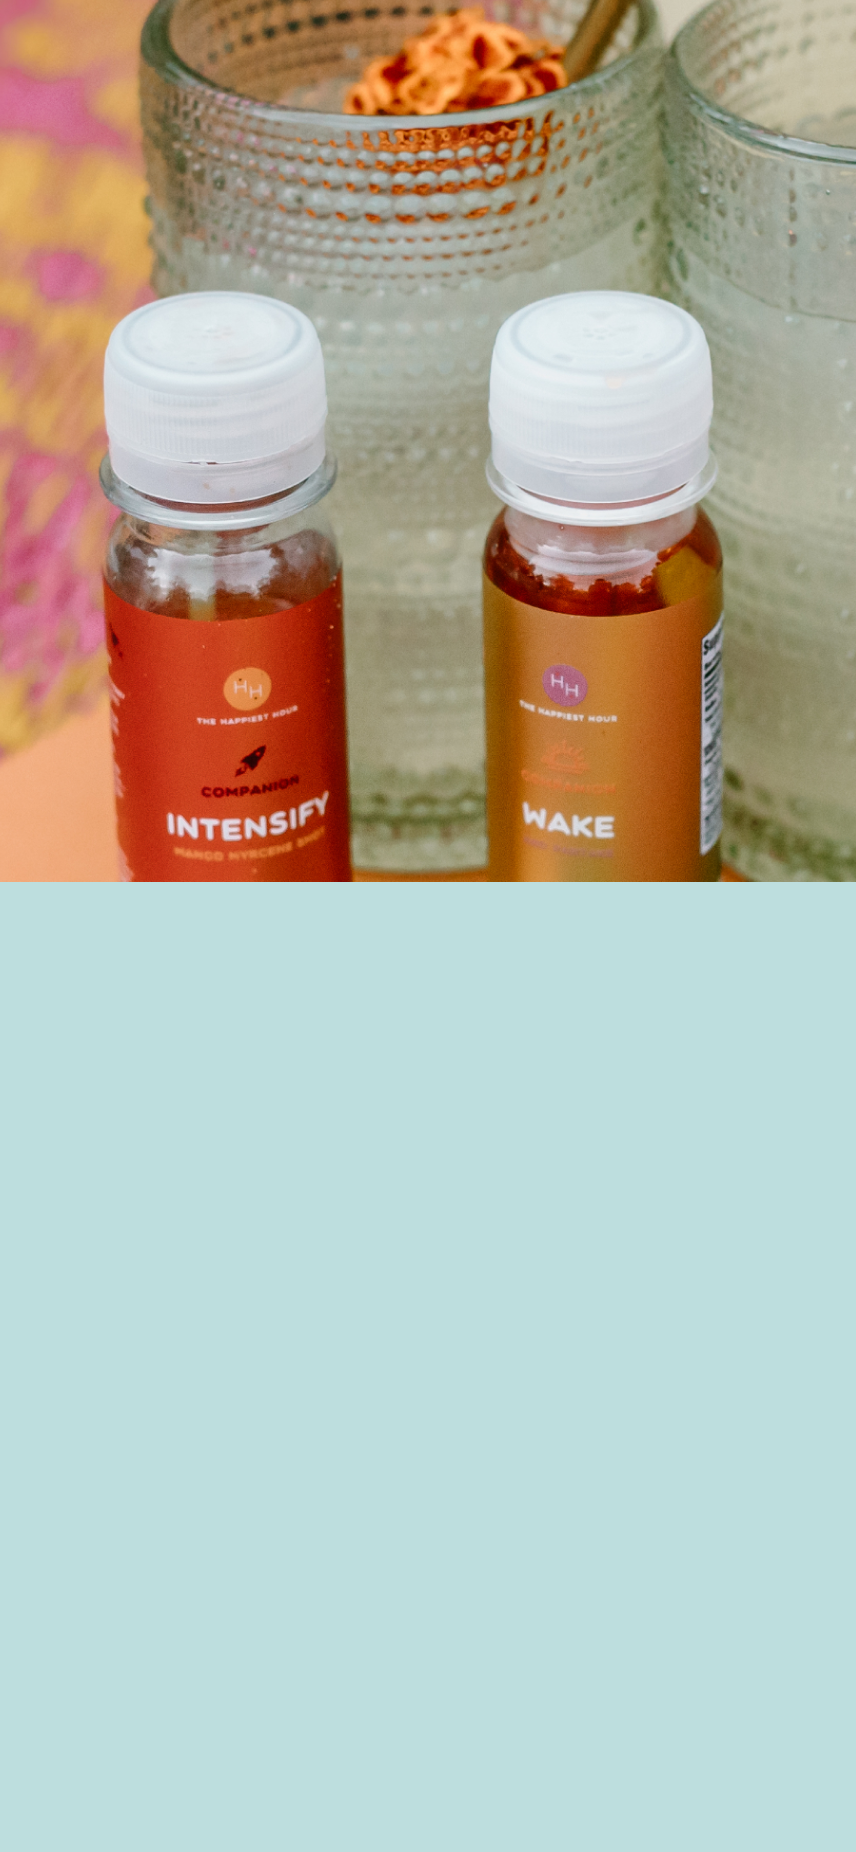 Intensify and Wake terpene-infused drinks by The Happiest Hour